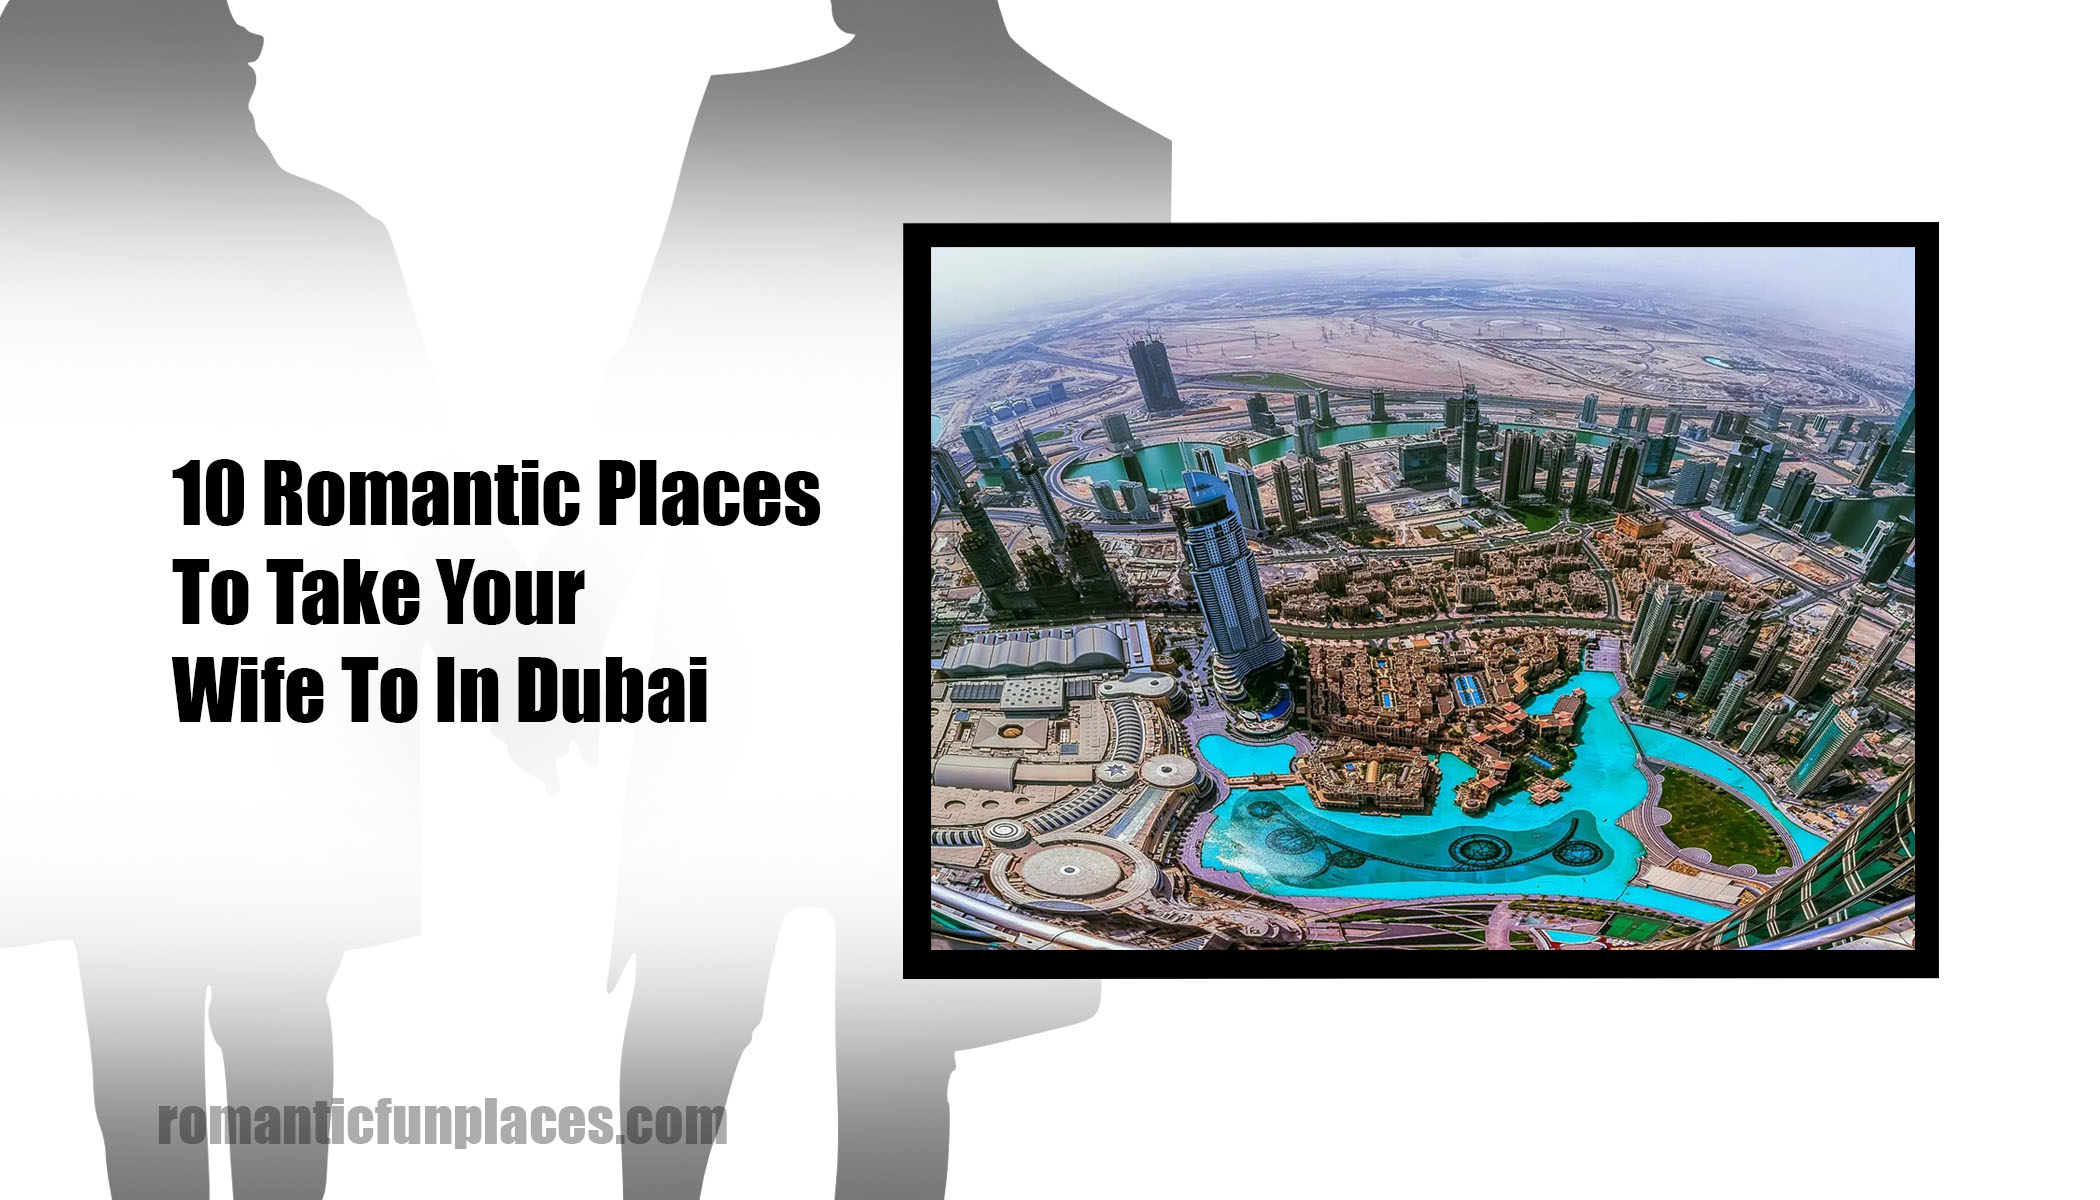 10 Romantic Places To Take Your Wife To In Dubai